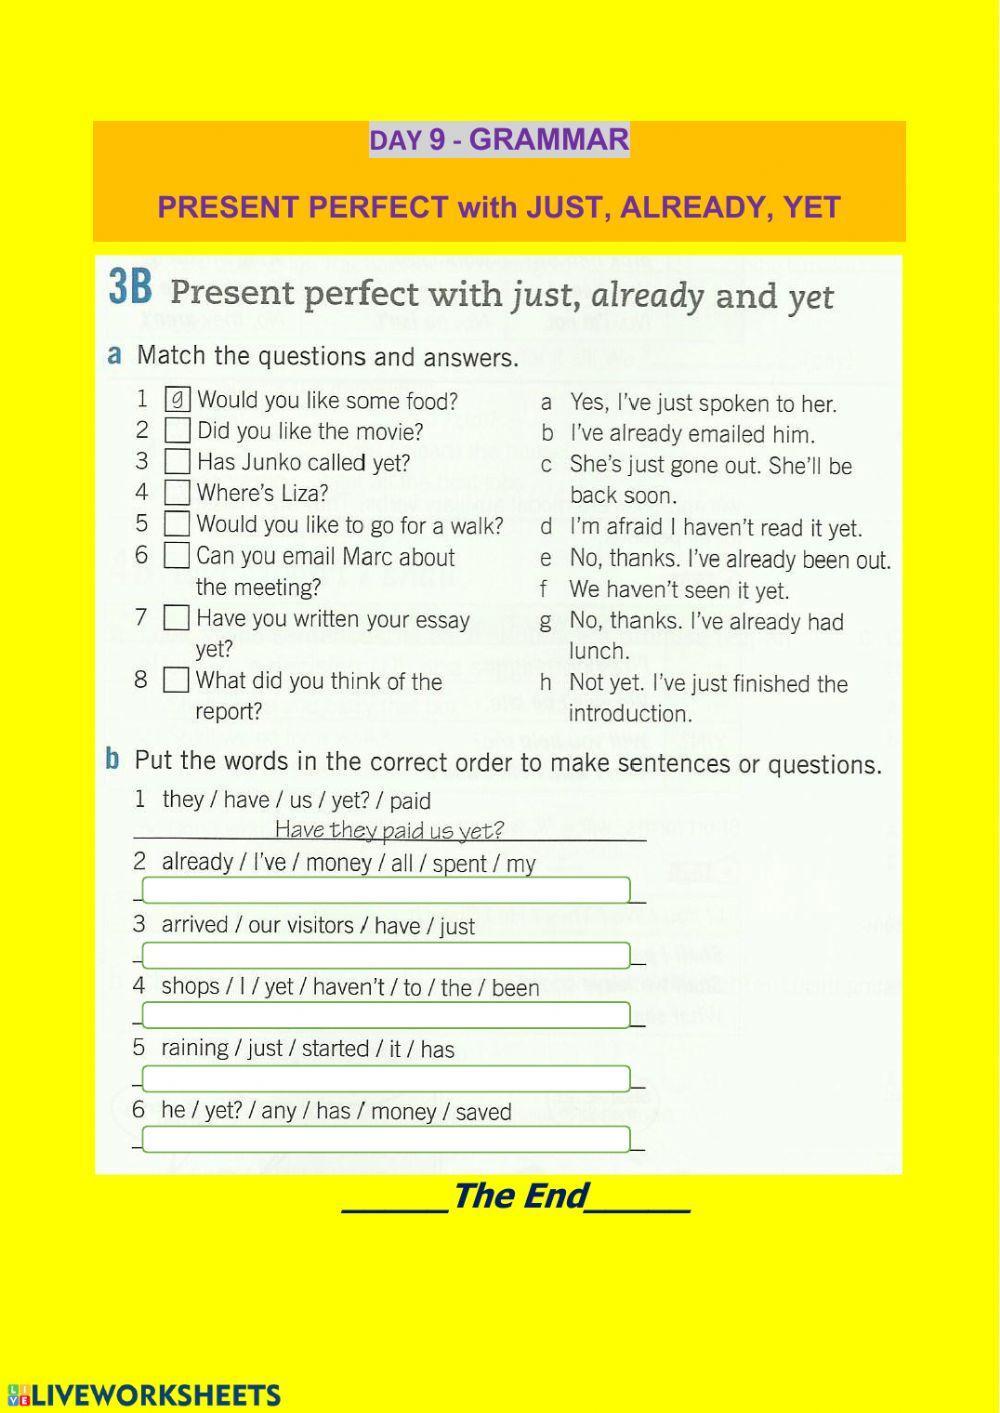 Present perfect with just, already and yet